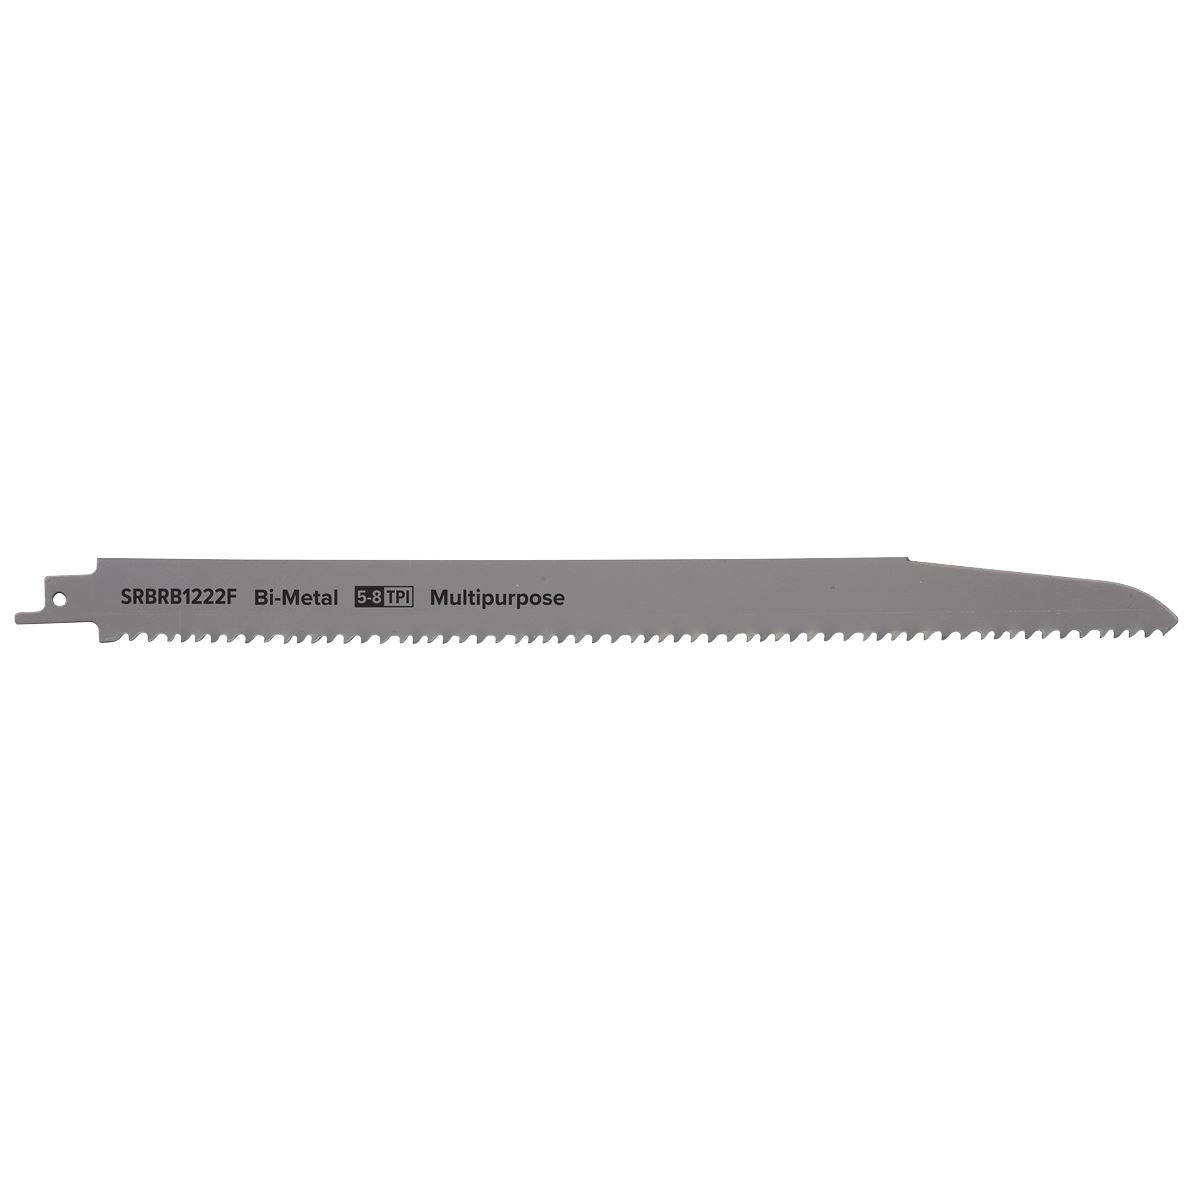 Sealey Reciprocating Saw Blade Multipurpose 300mm 5-8tpi - Pack of 5